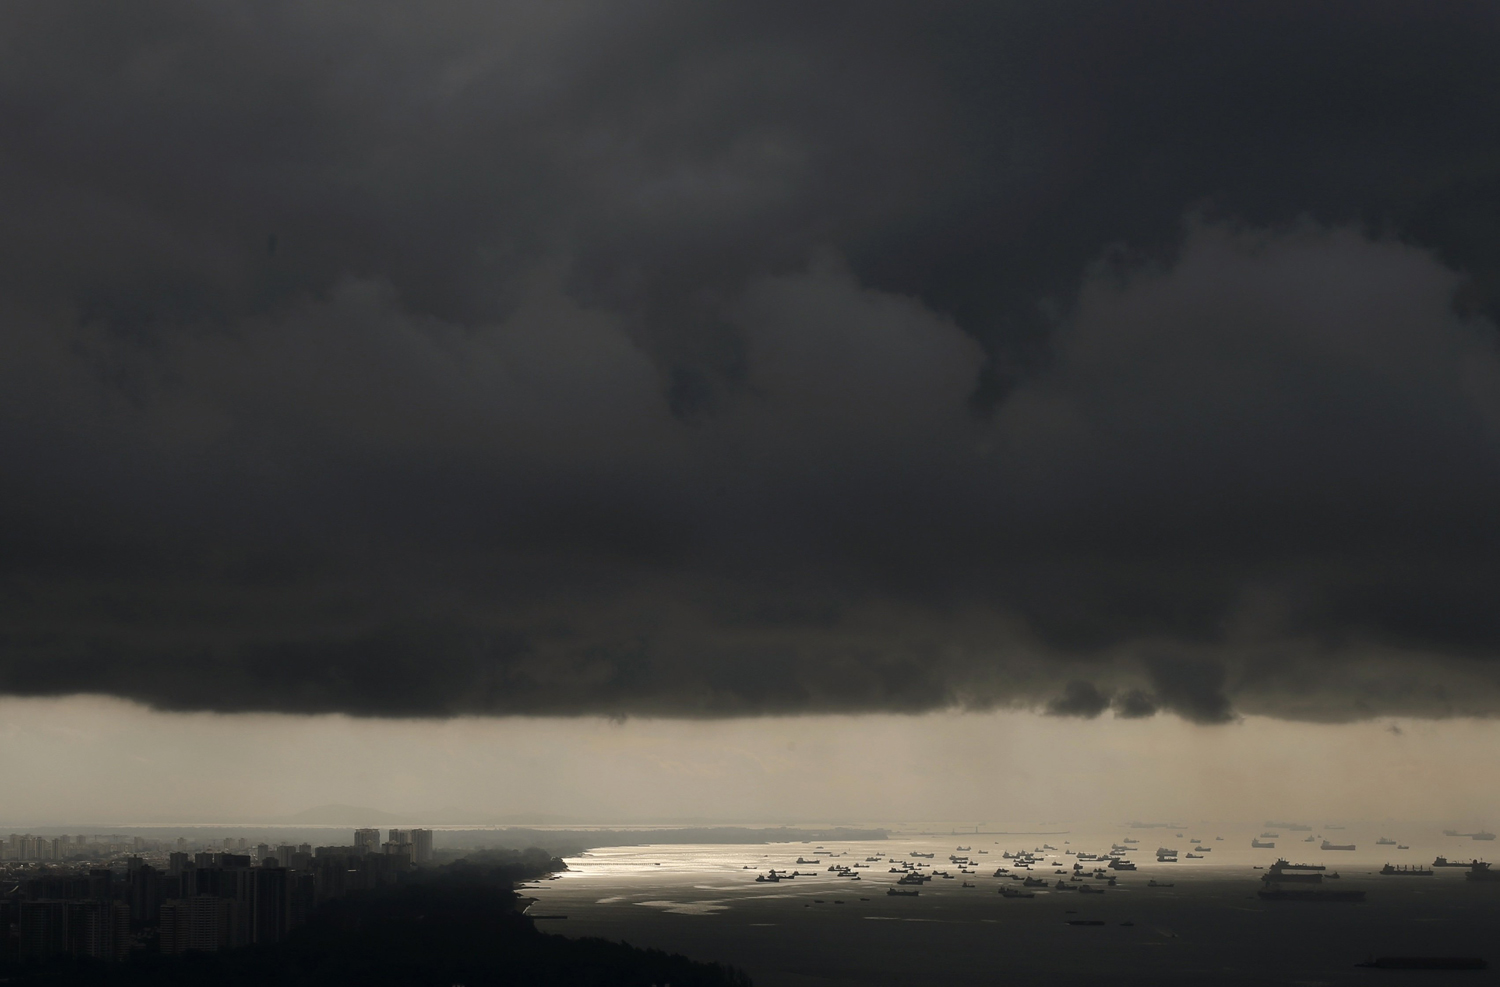 Aug. 15, 2014. Vessels anchor in the sea as storm clouds gather over the east coast of Singapore.